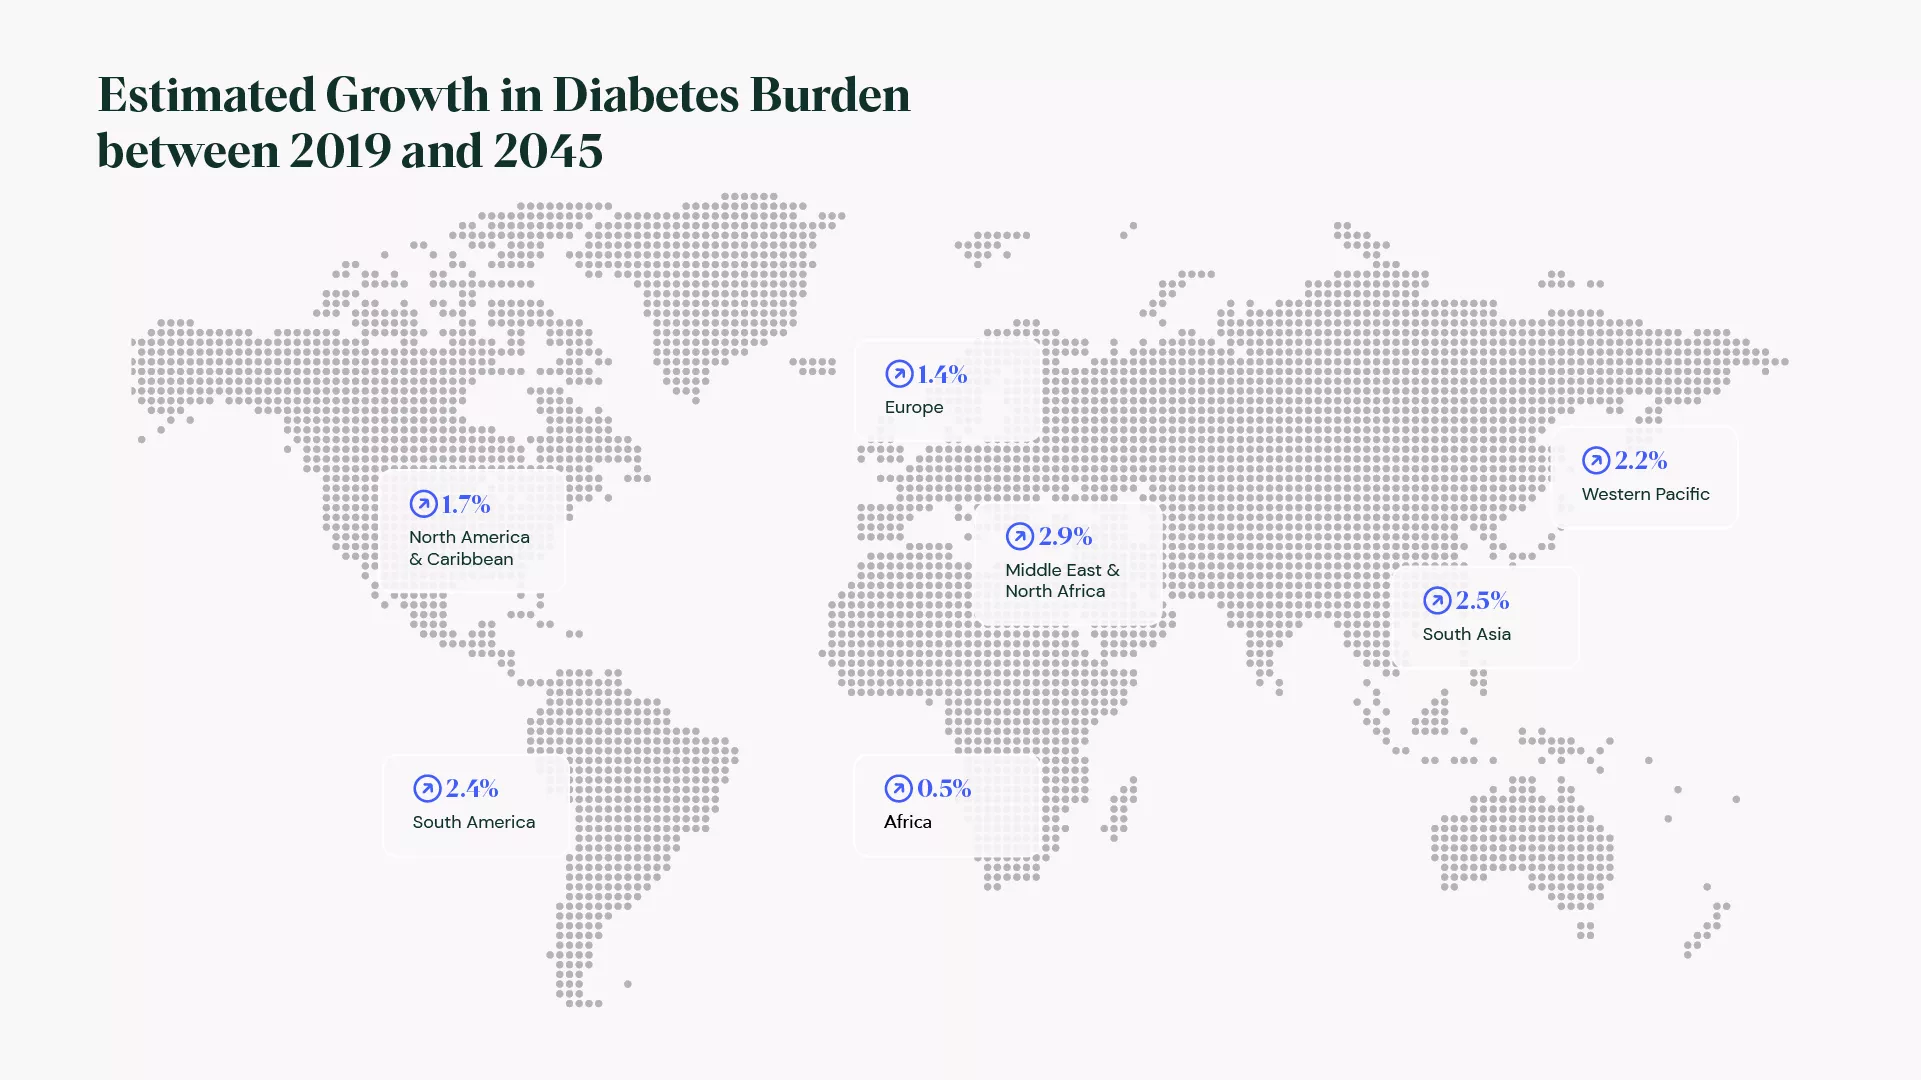 Estimated growth in diabetes